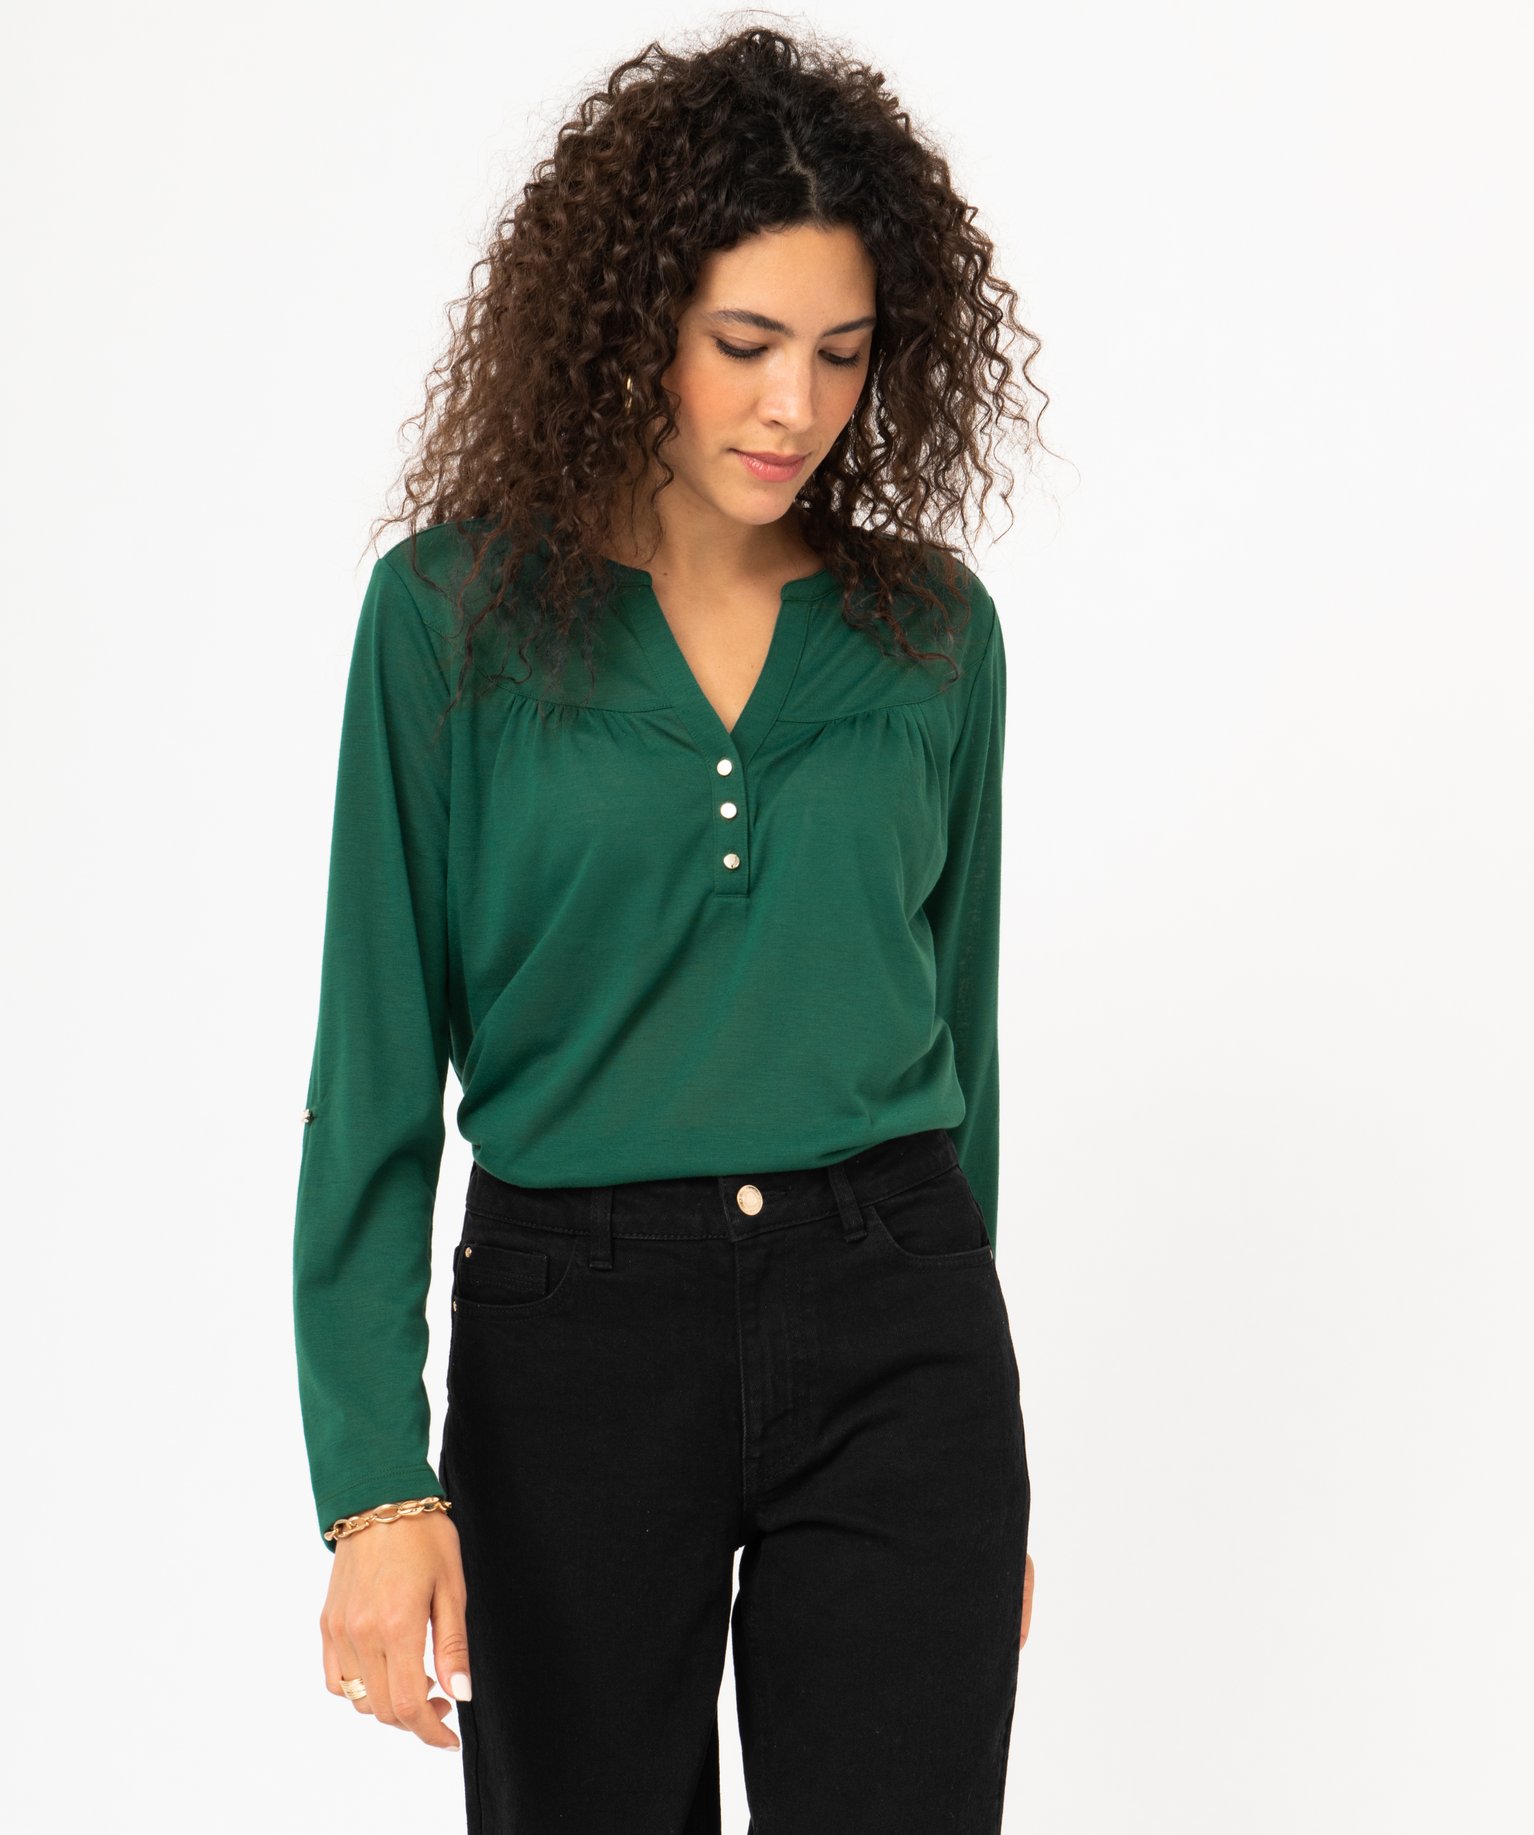 tee-shirt a manches longues en polyester recycle femme vert t-shirts manches longues